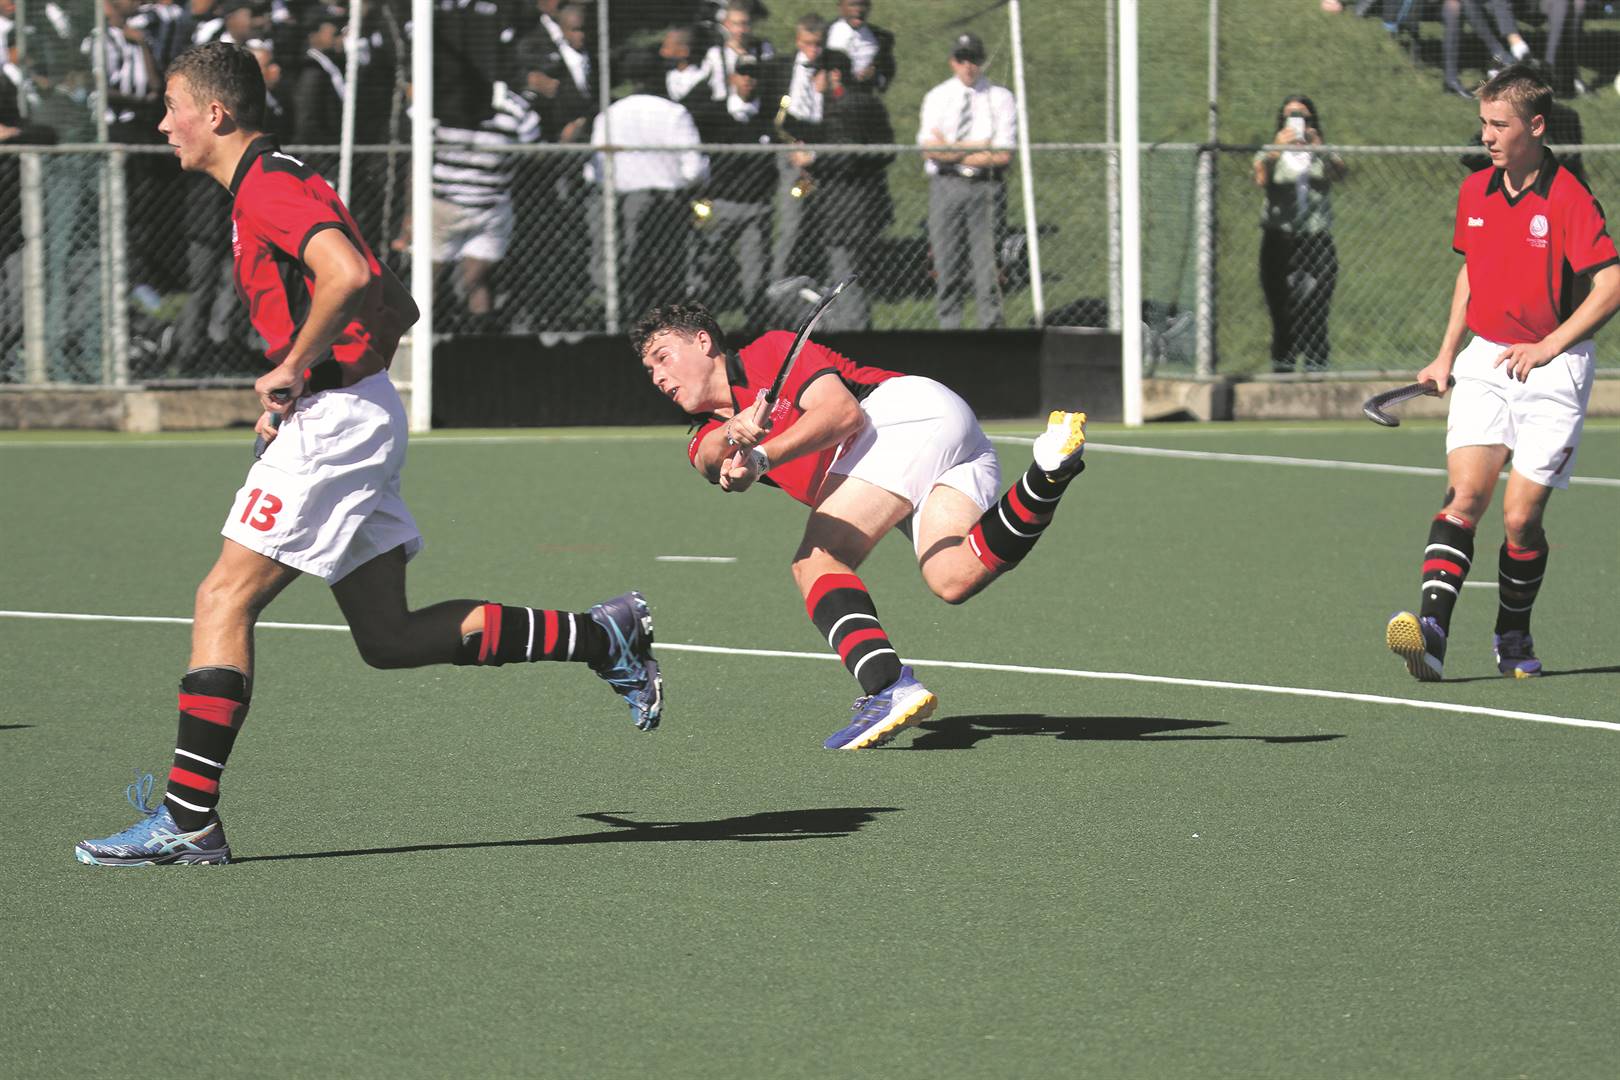 Maritzburg College’s Matthew Ponter makes an attempt at goal in the weekend’s encounter with Hilton College.